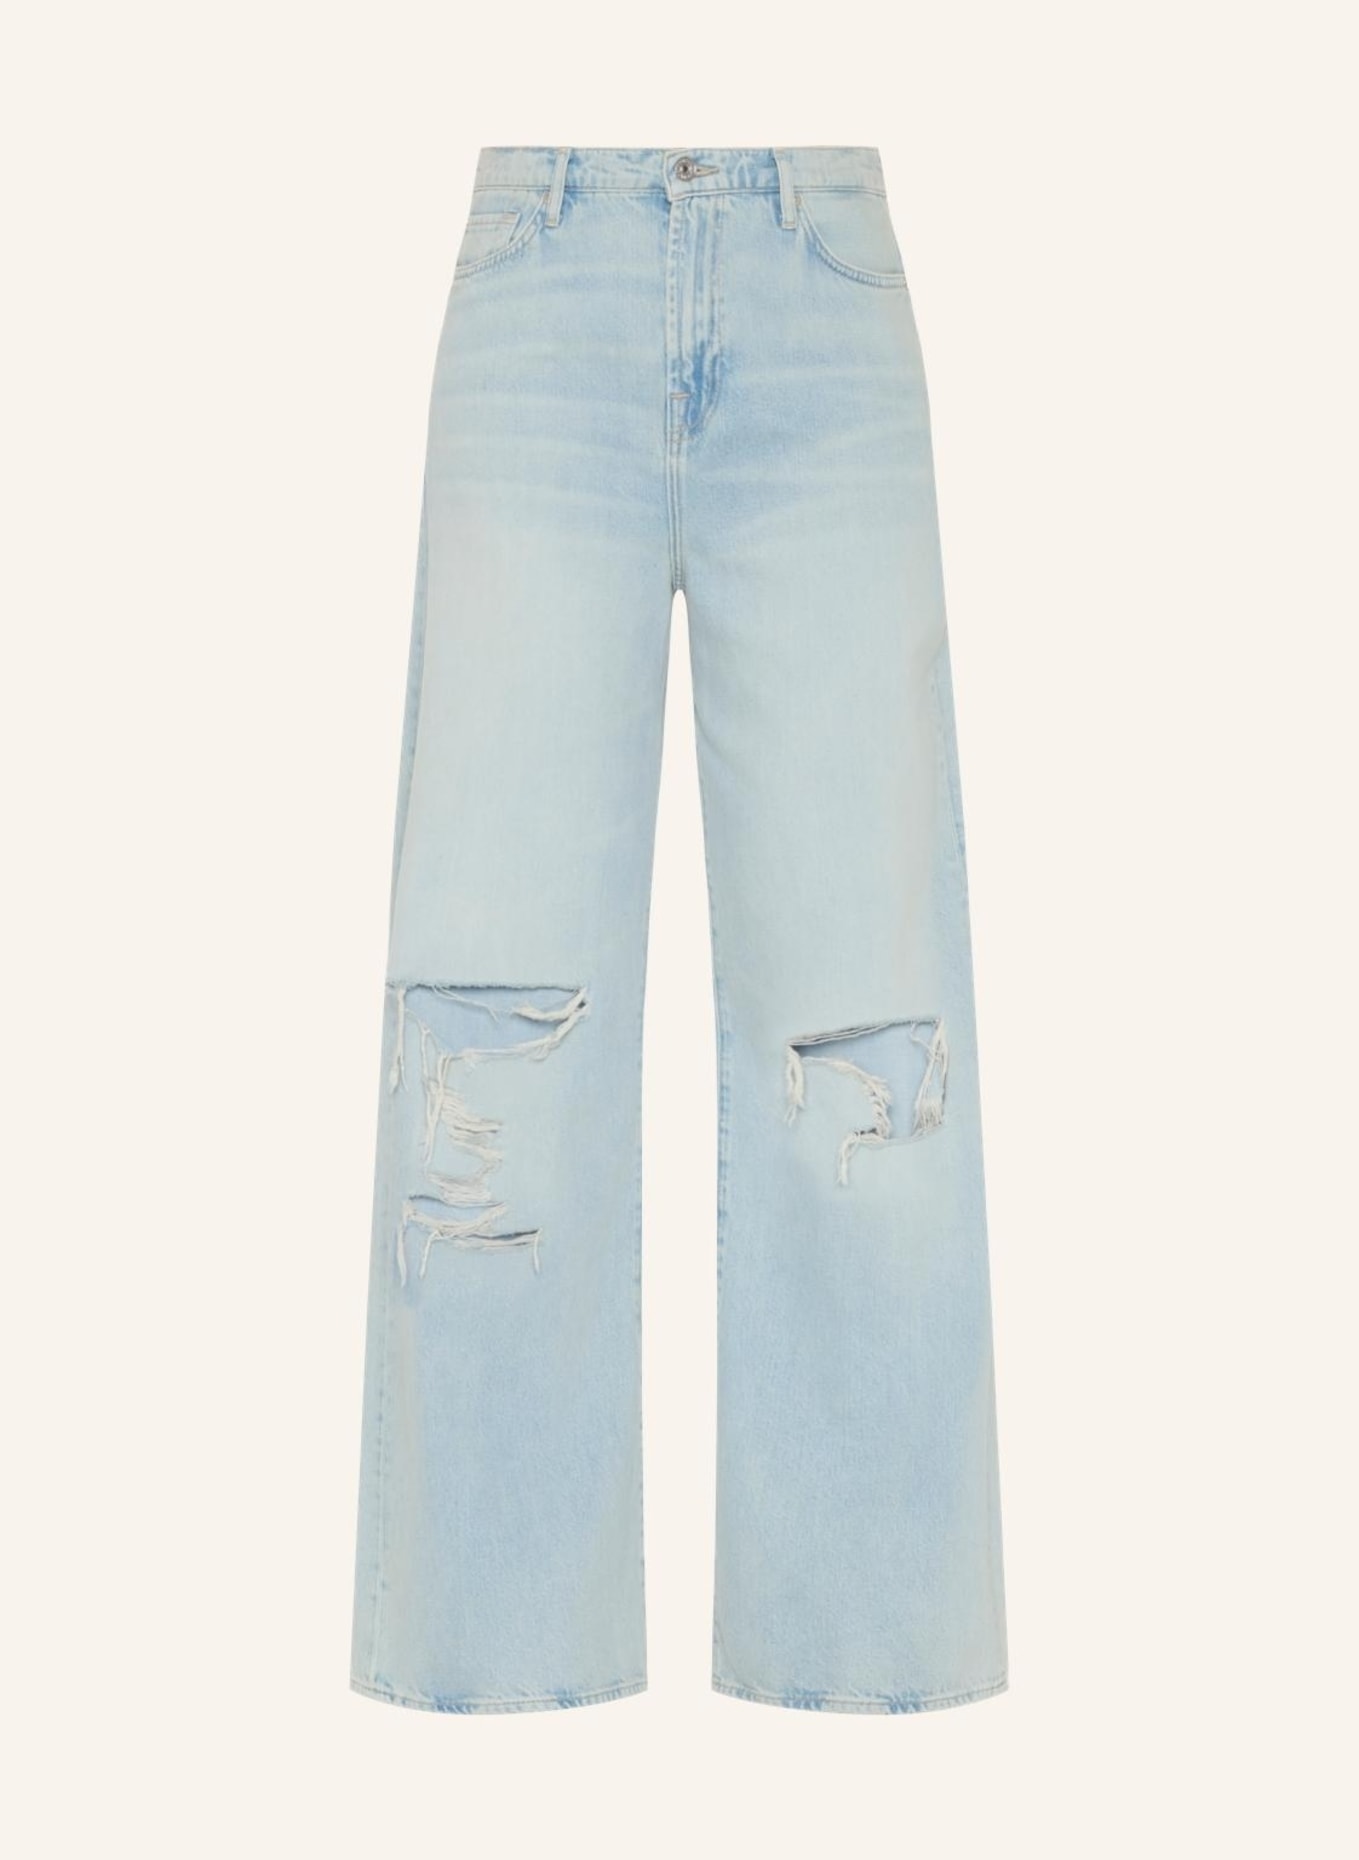 7 for all mankind Jeans SCOUT Straight fit, Farbe: BLAU (Bild 1)